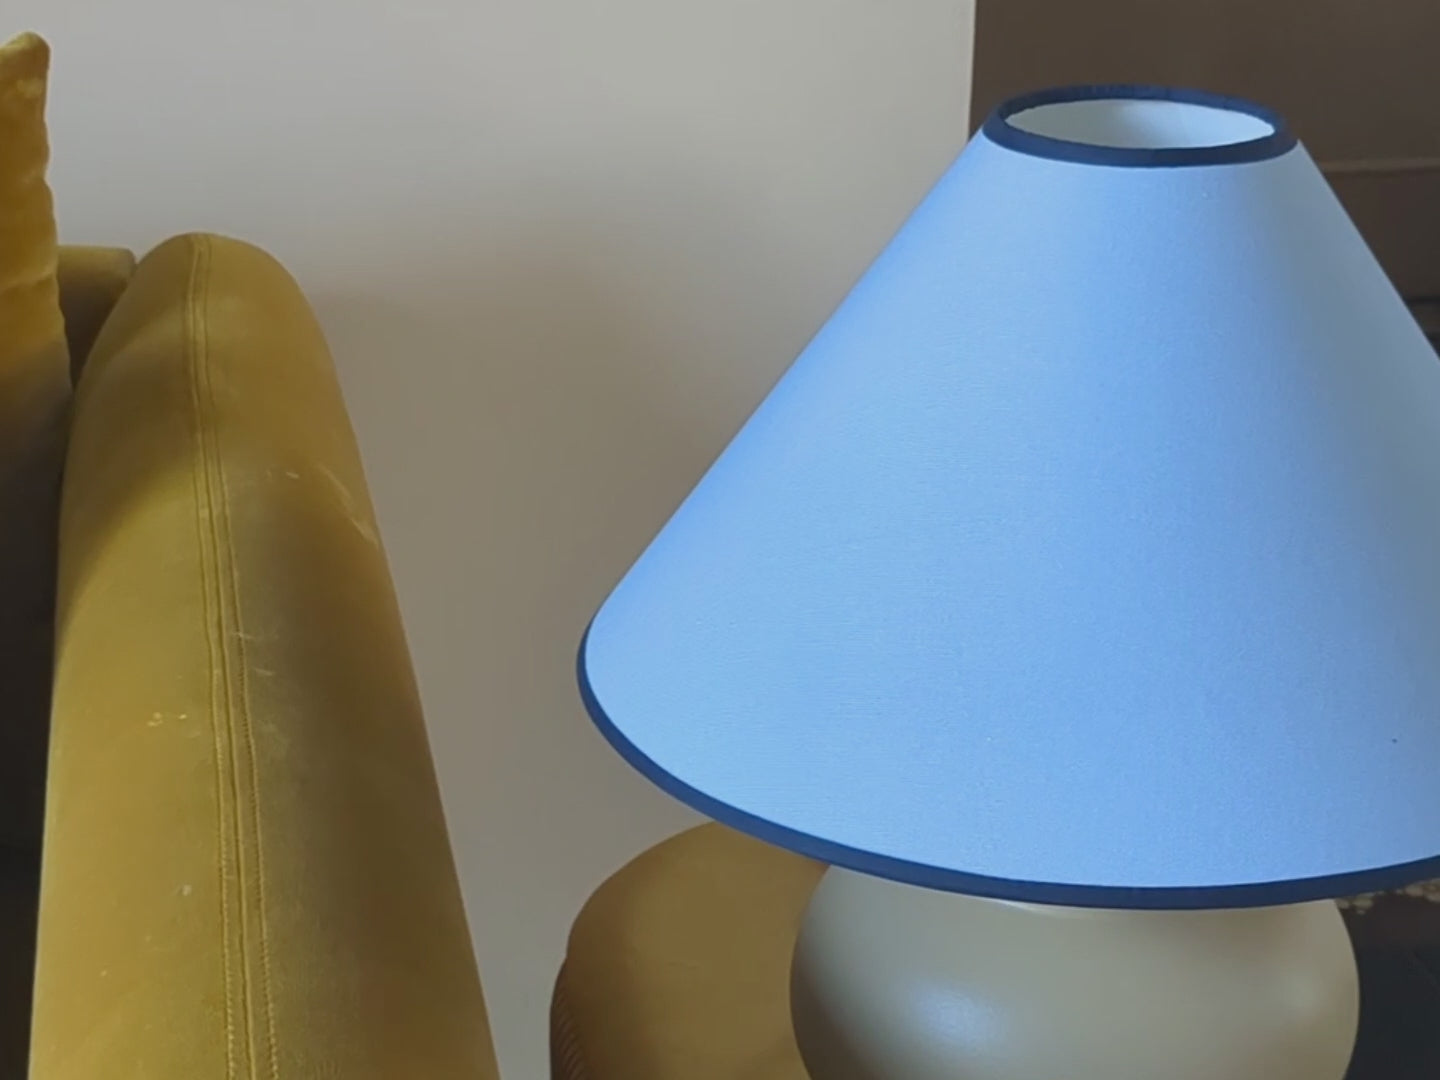 A blue plain fabric cone lamp shade with a small opening at the top (also known as a coolie shape) has a navy blue tonal-coloured trim around both edges. It has a reversible gimble so it can be used as an uplighter or downlighter.  The light is shown in a living room and is turned on by someone. 